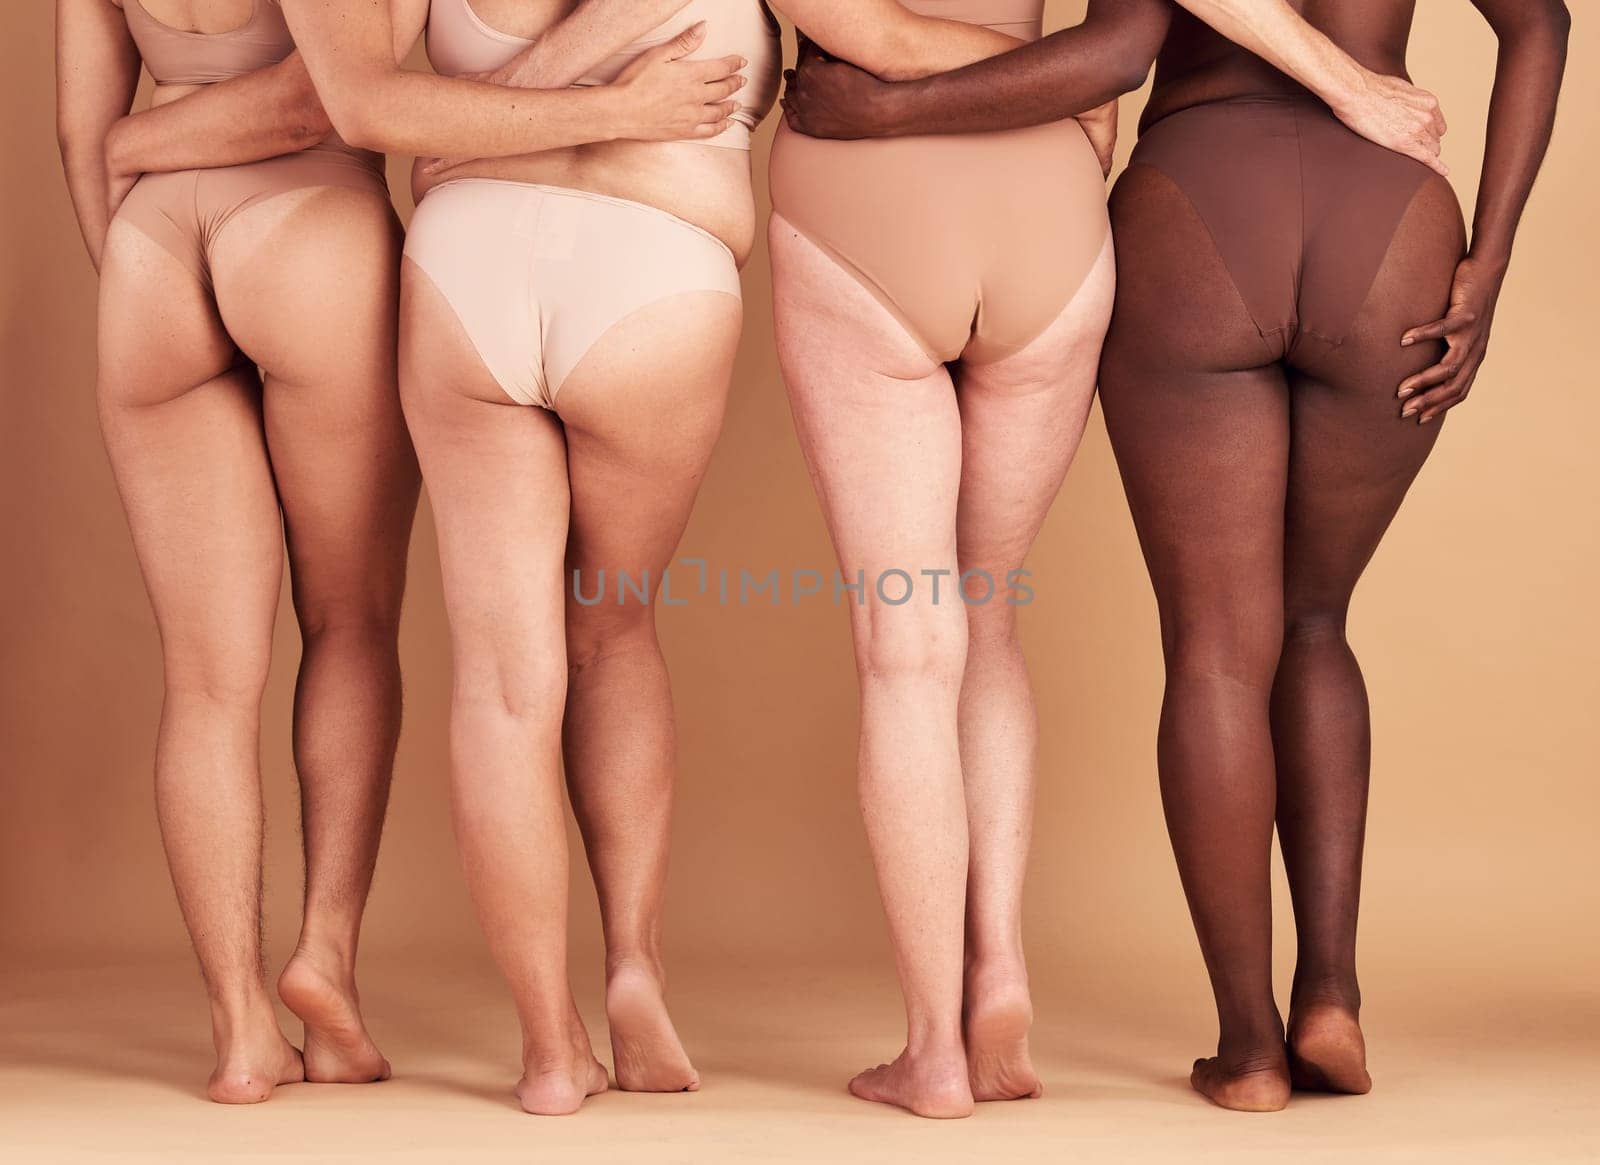 Women group, lingerie and butt in studio for wellness, fashion and diversity with plus size in unity. Back, bum and woman model team with solidarity, body positive or health for beauty by background.